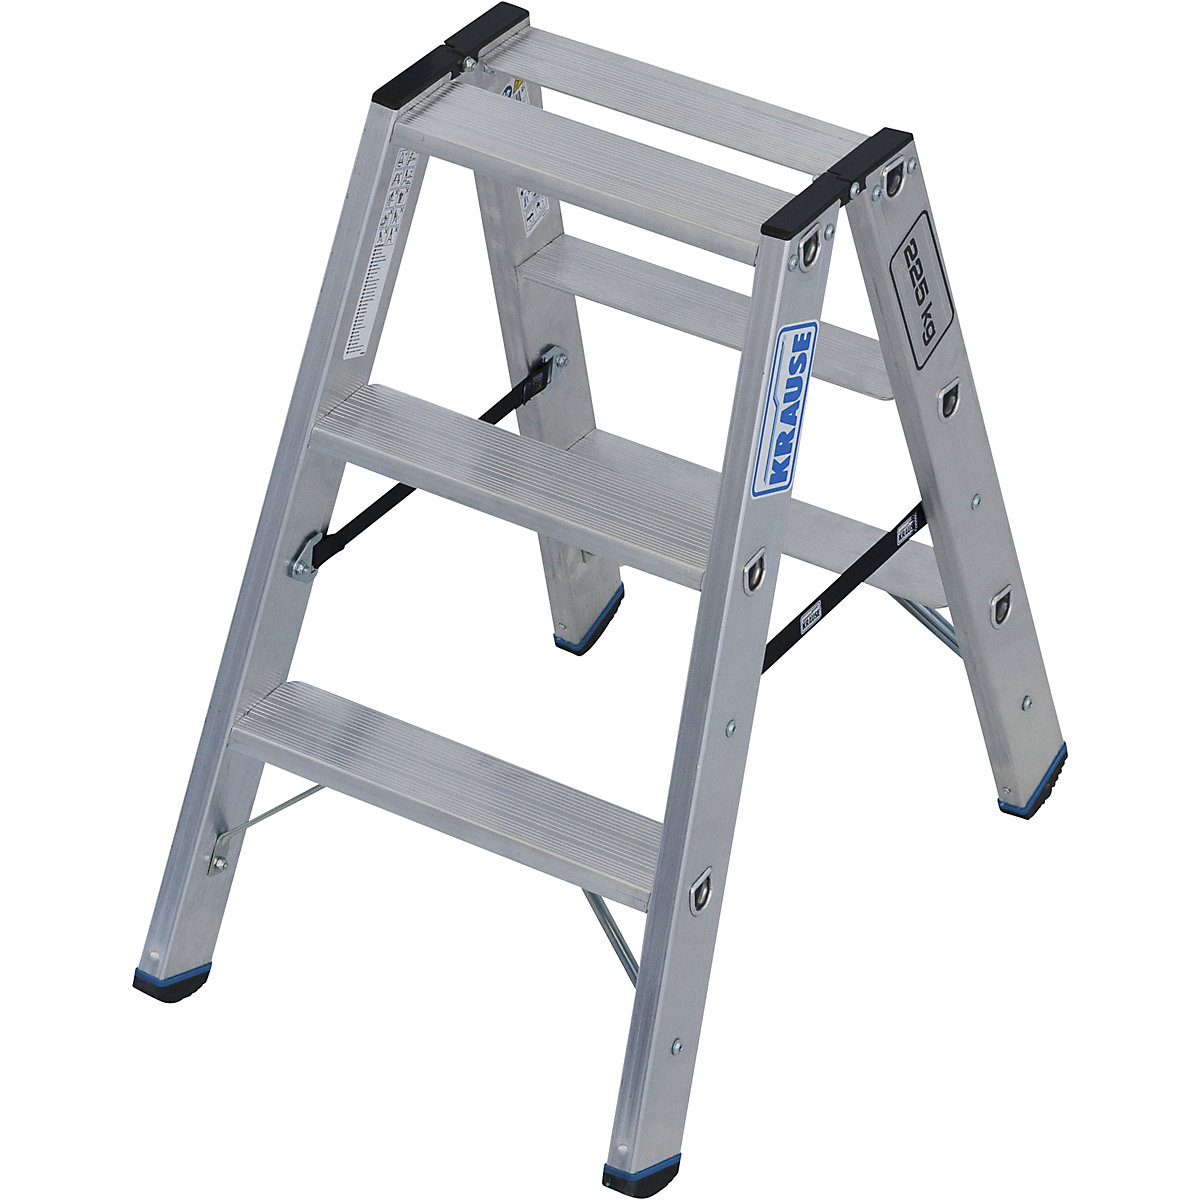 Heavy duty step ladder – KRAUSE, double sided access, up to 225 kg, 2x3 steps-5